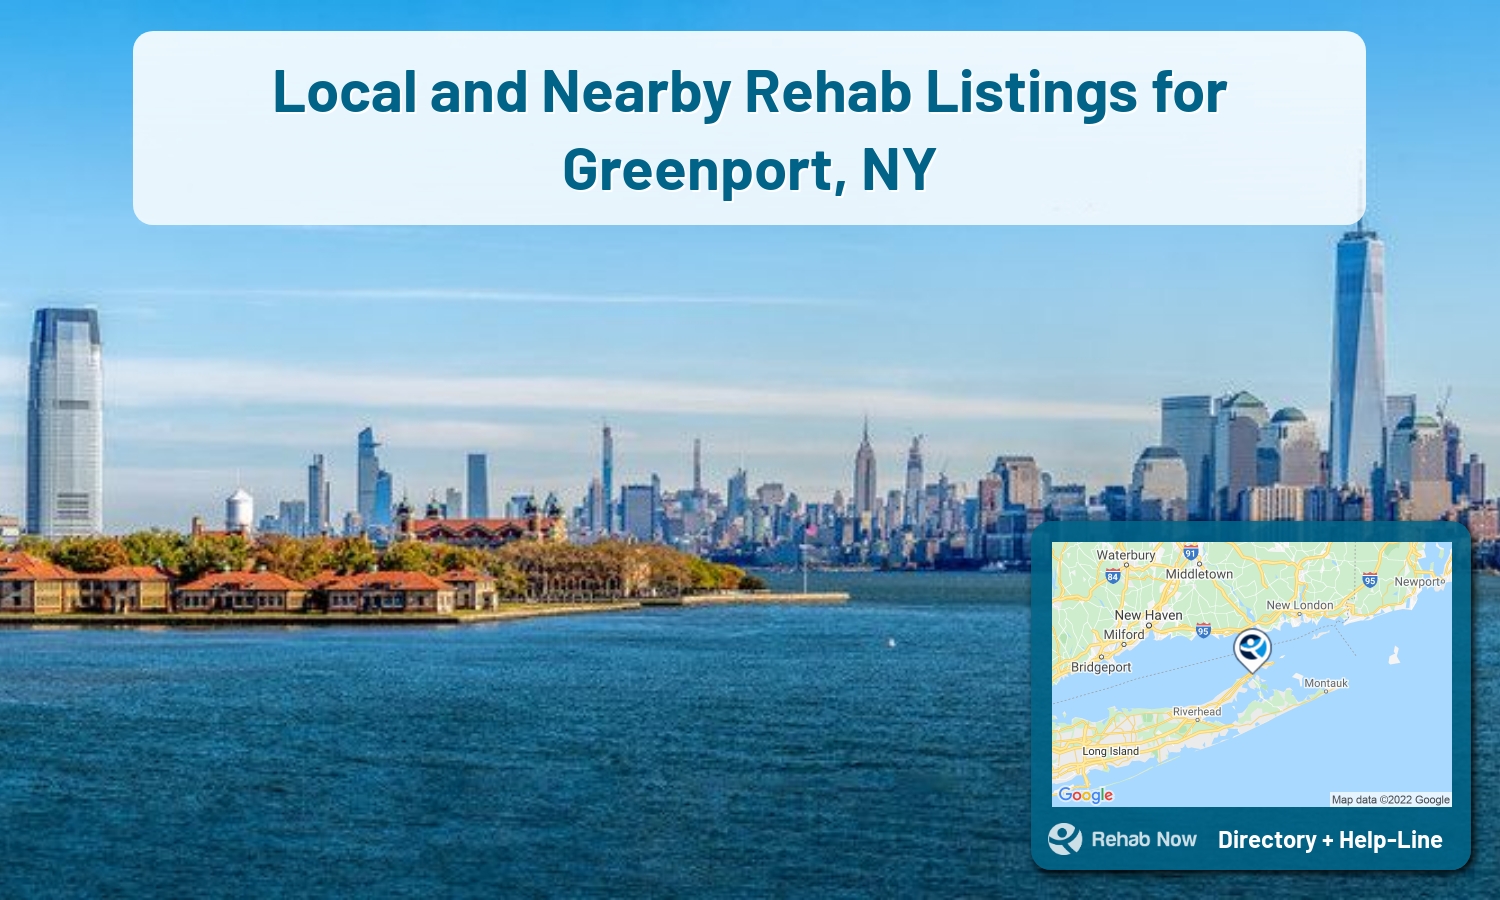 Greenport, NY Treatment Centers. Find drug rehab in Greenport, New York, or detox and treatment programs. Get the right help now!